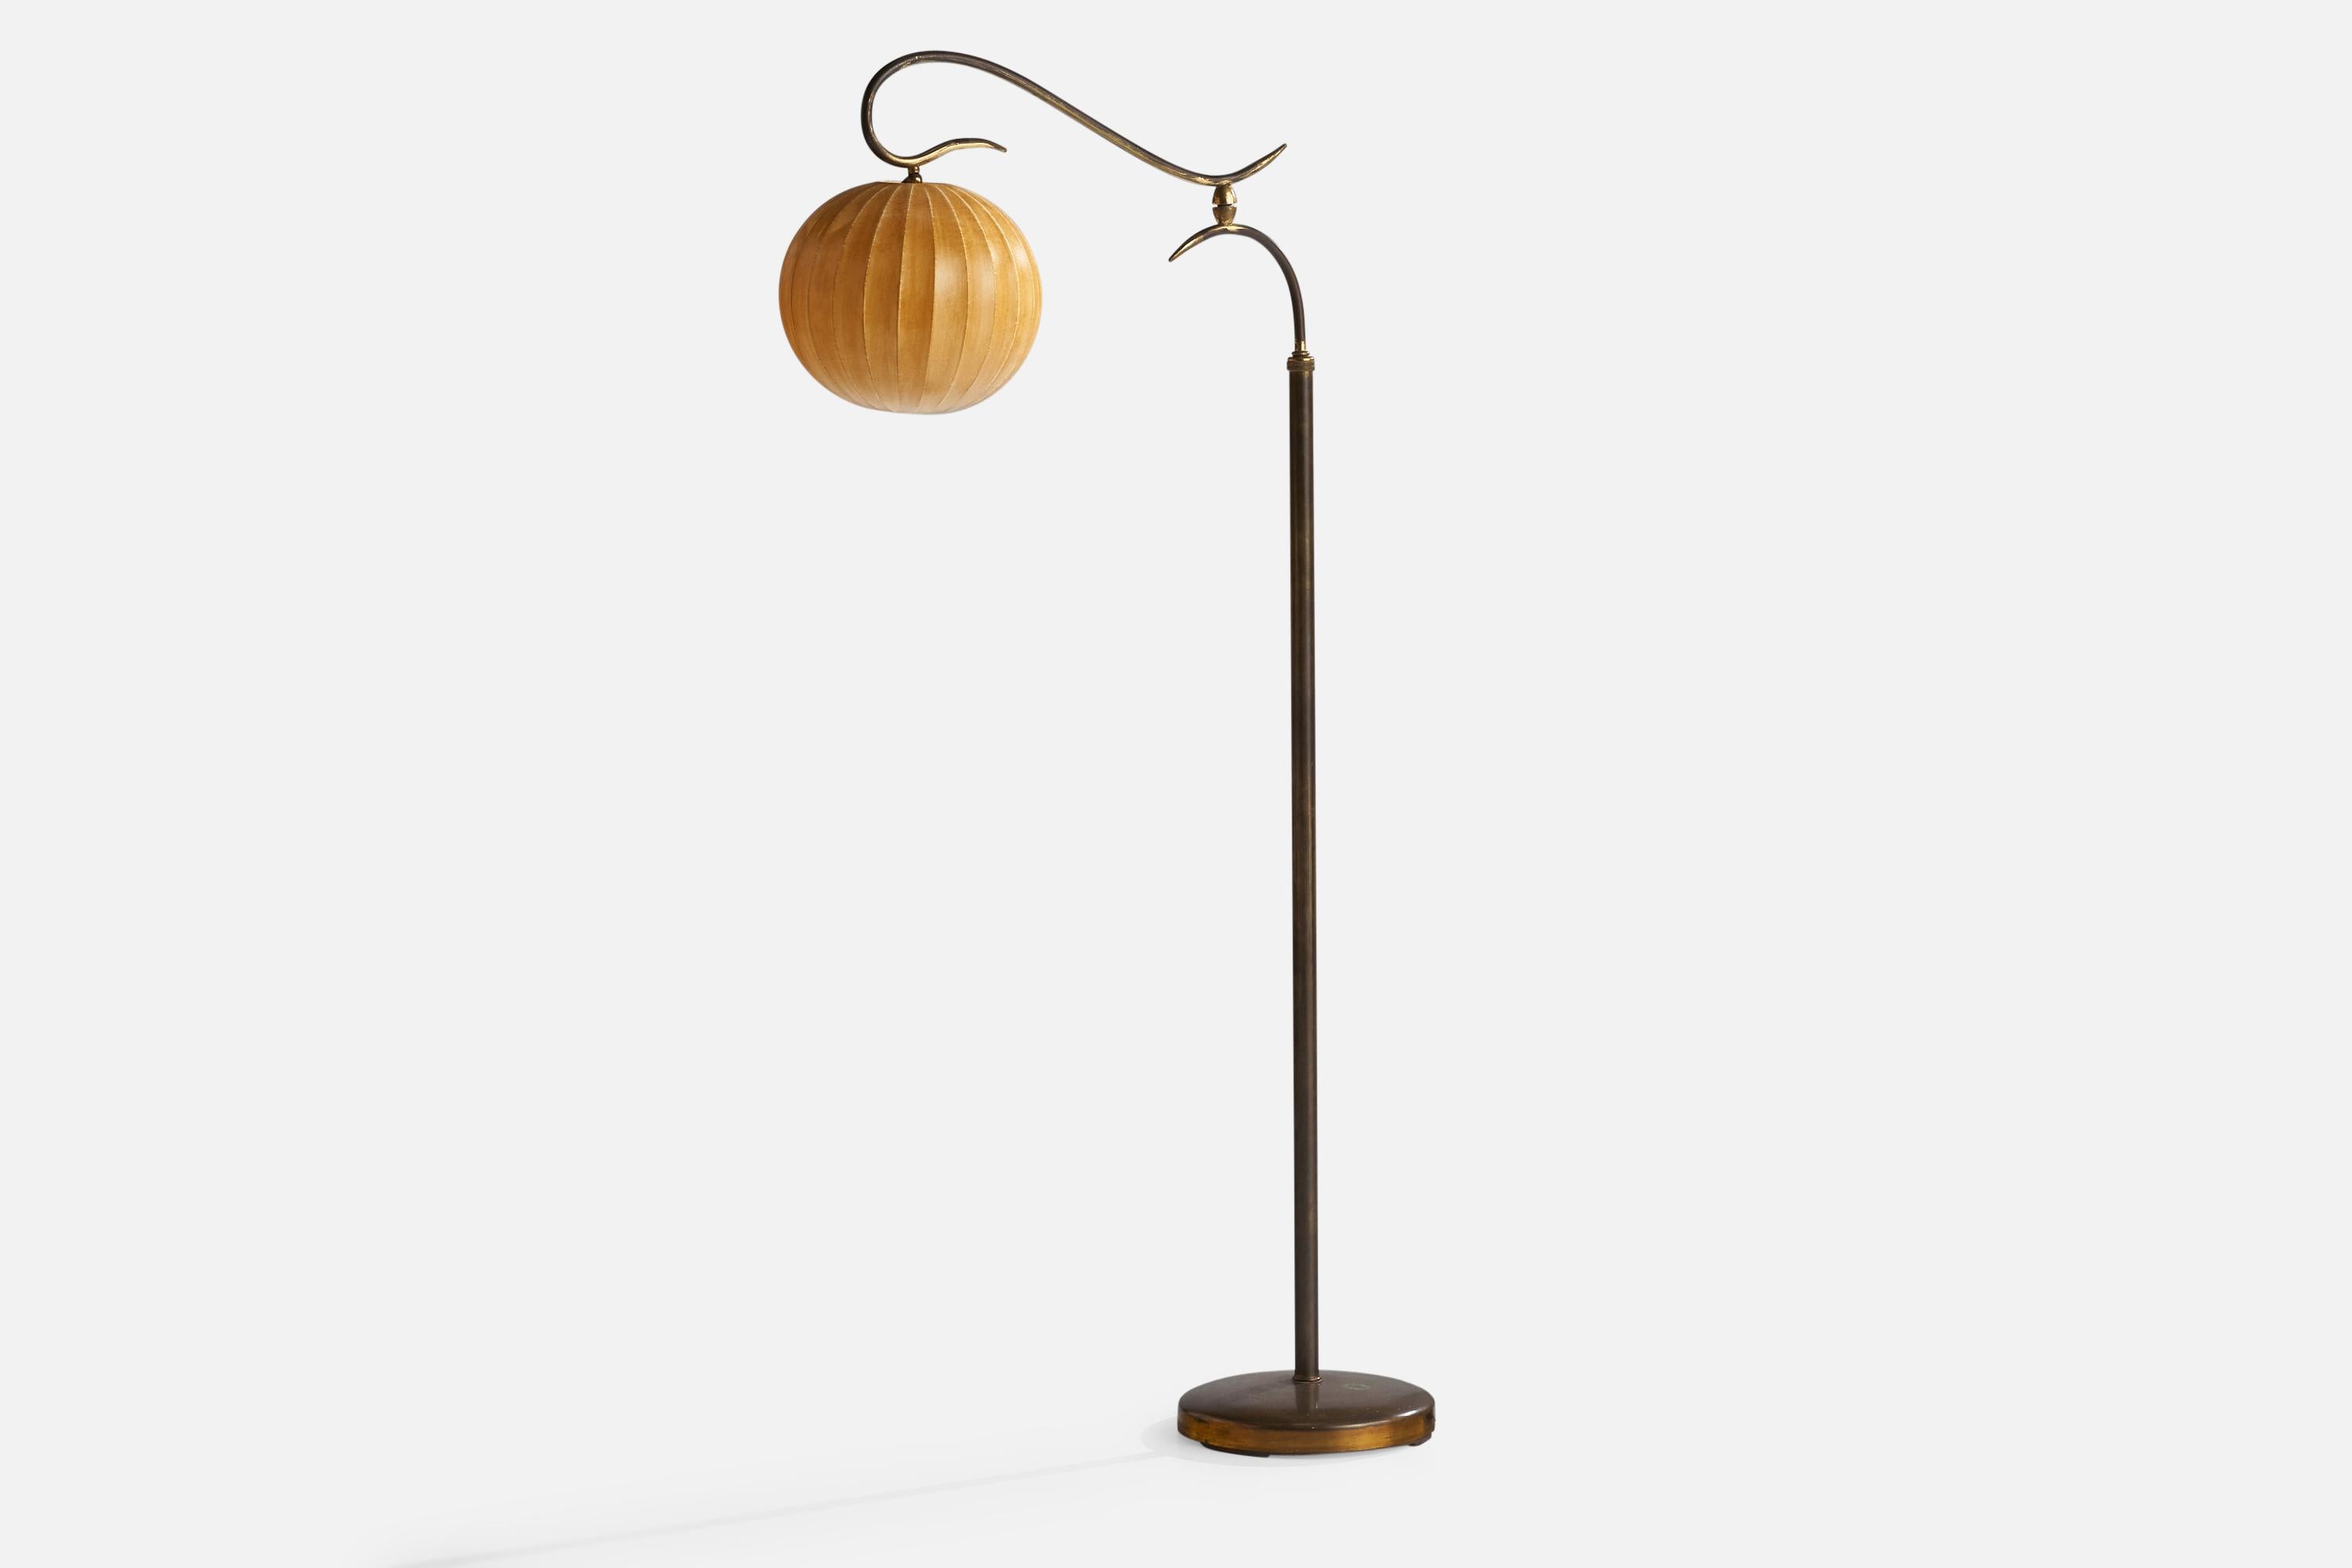 An adjustable brass and waxed cotton floor lamp designed and produced in Italy, 1930s.

Overall Dimensions (inches): 65” H x 12.25” W x 26.5” D
Stated dimensions include shade.
Bulb Specifications: E-26 Bulb
Number of Sockets: 1
All lighting will be